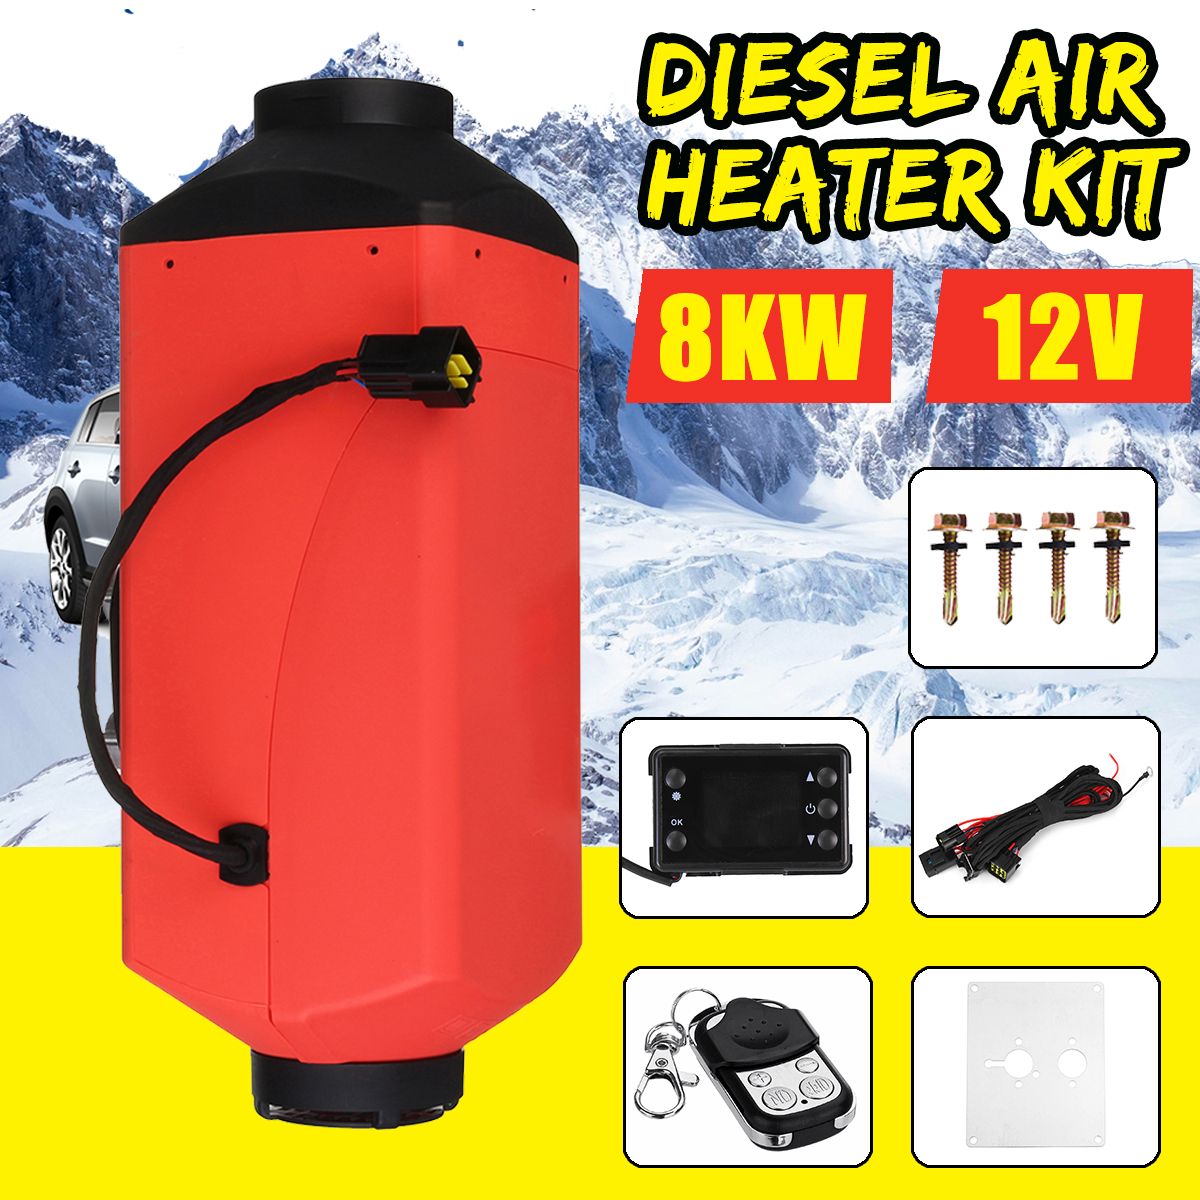 12V-8KW-Air-Diesels-Fuel-Heater-LCD-Thermostat-For-Boats-Bus-Car-Parking-Heater-With-Remote-Control-1529756